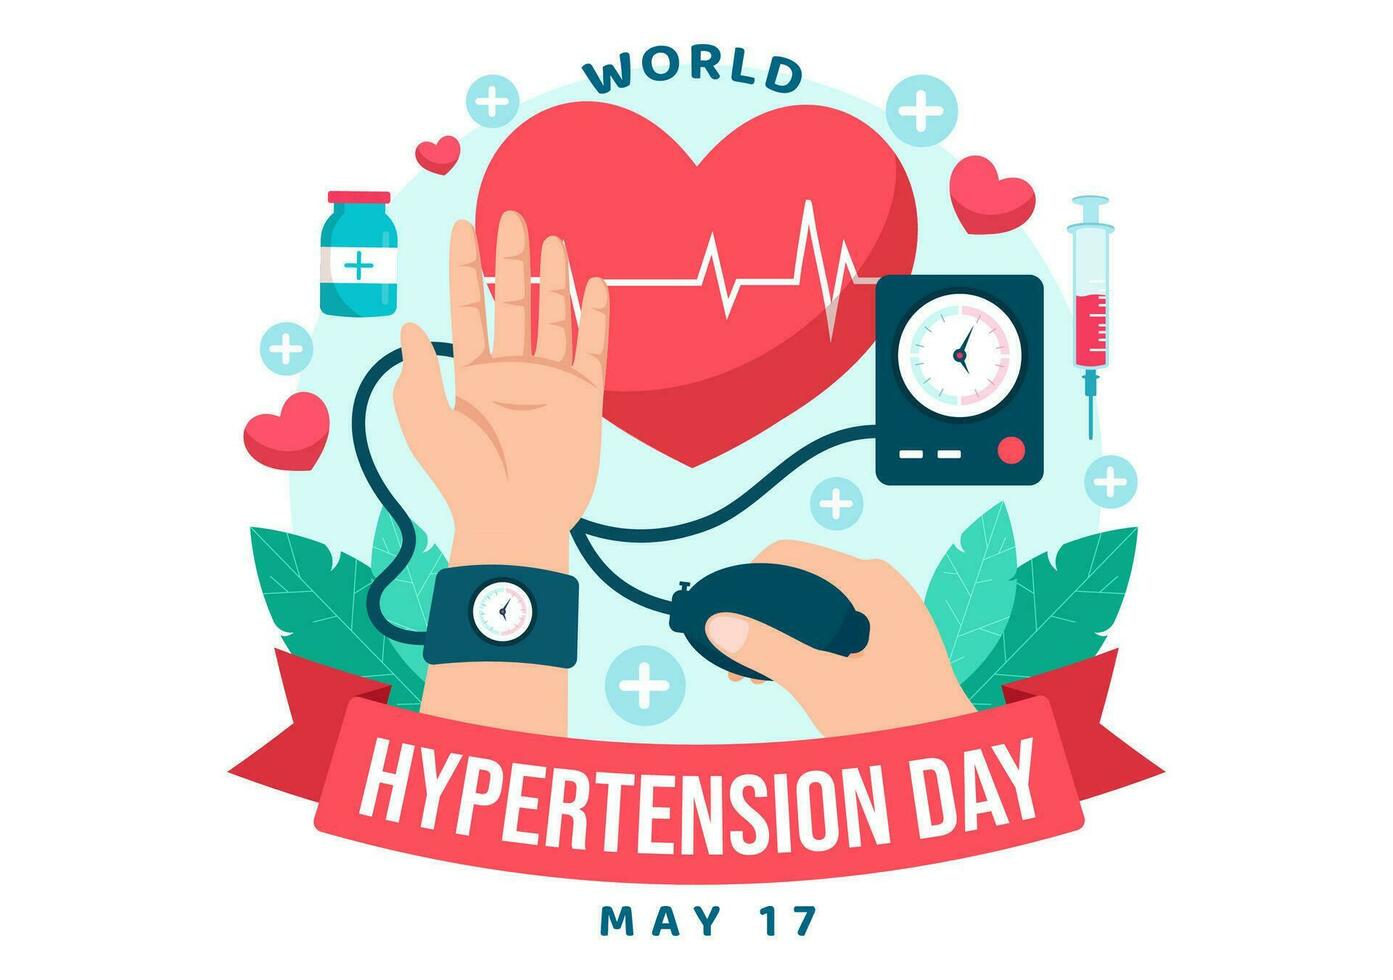 World Hypertension Day Vector Illustration on May 17th with High Blood Pressure, Tensimeter and Red Love Image in Healthcare Flat Background